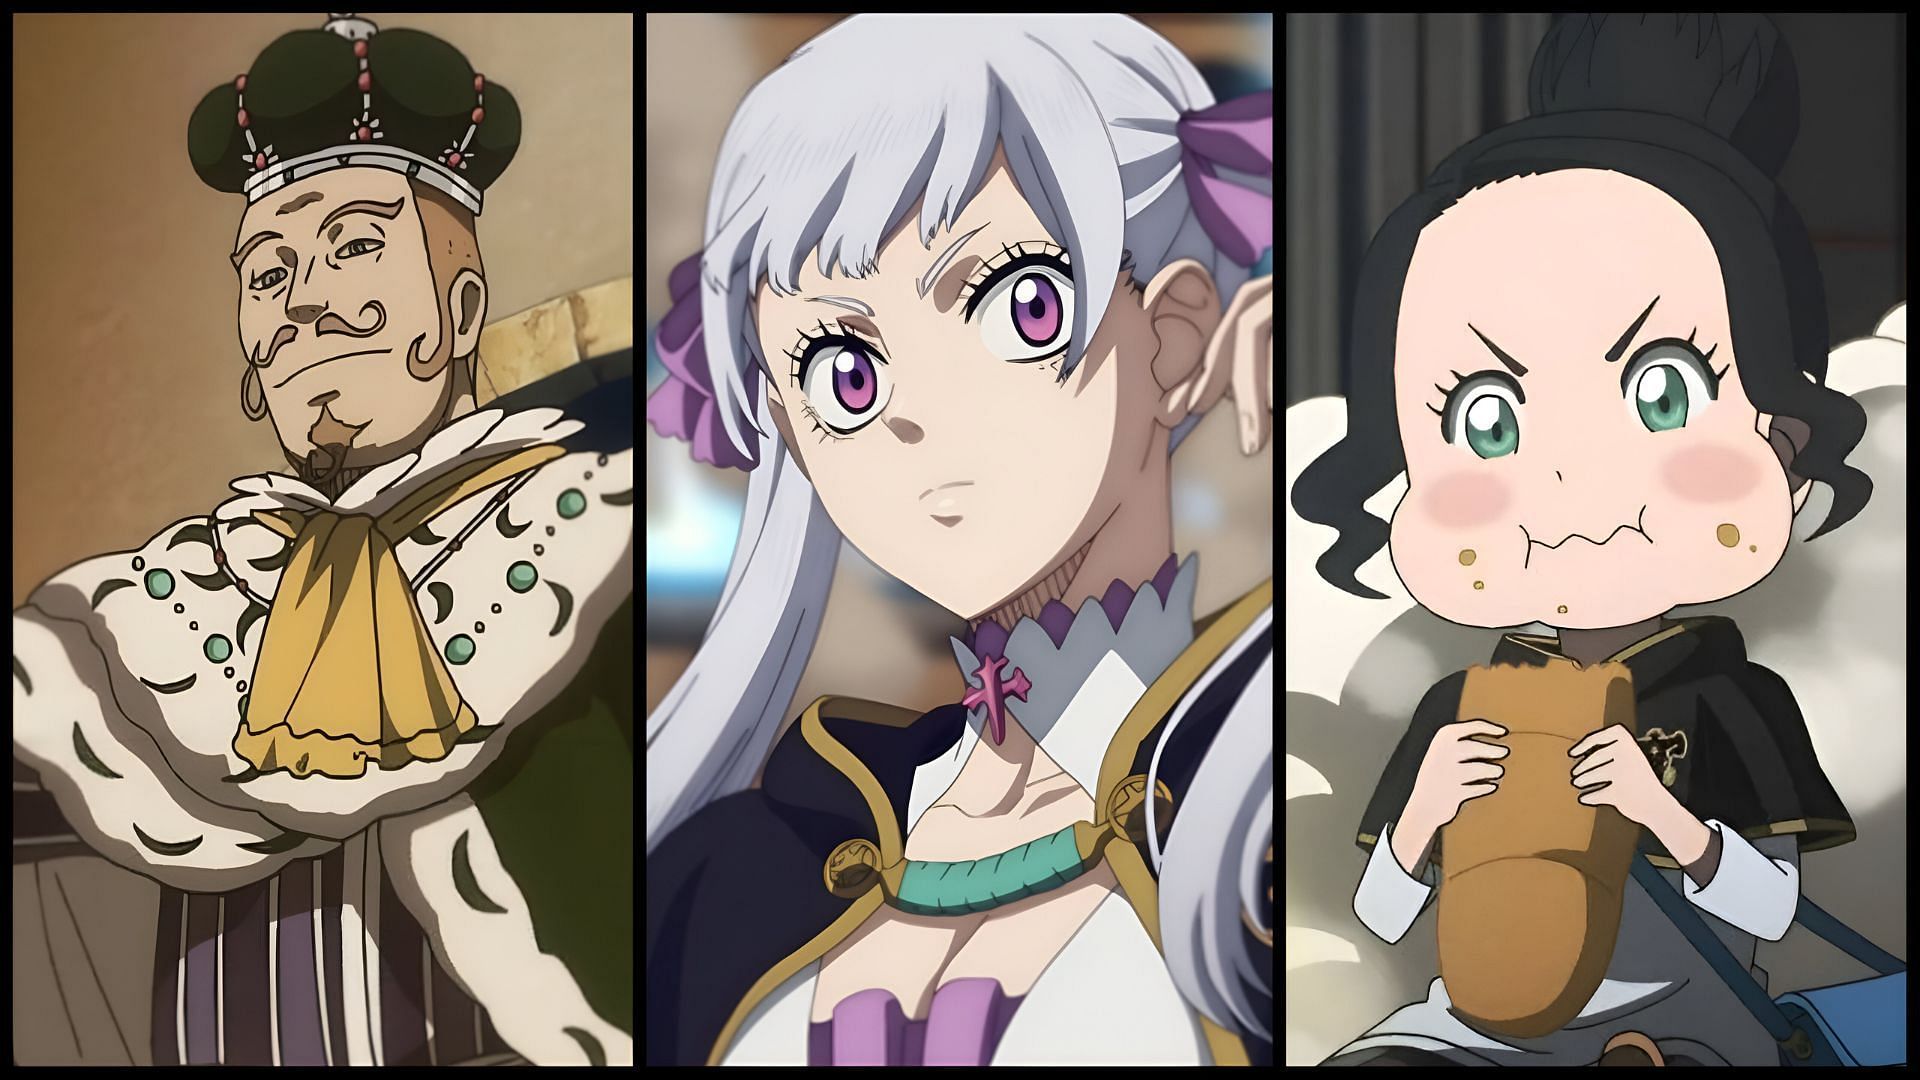 7 Black Clover characters who ideally represent the Seven Deadly Sins